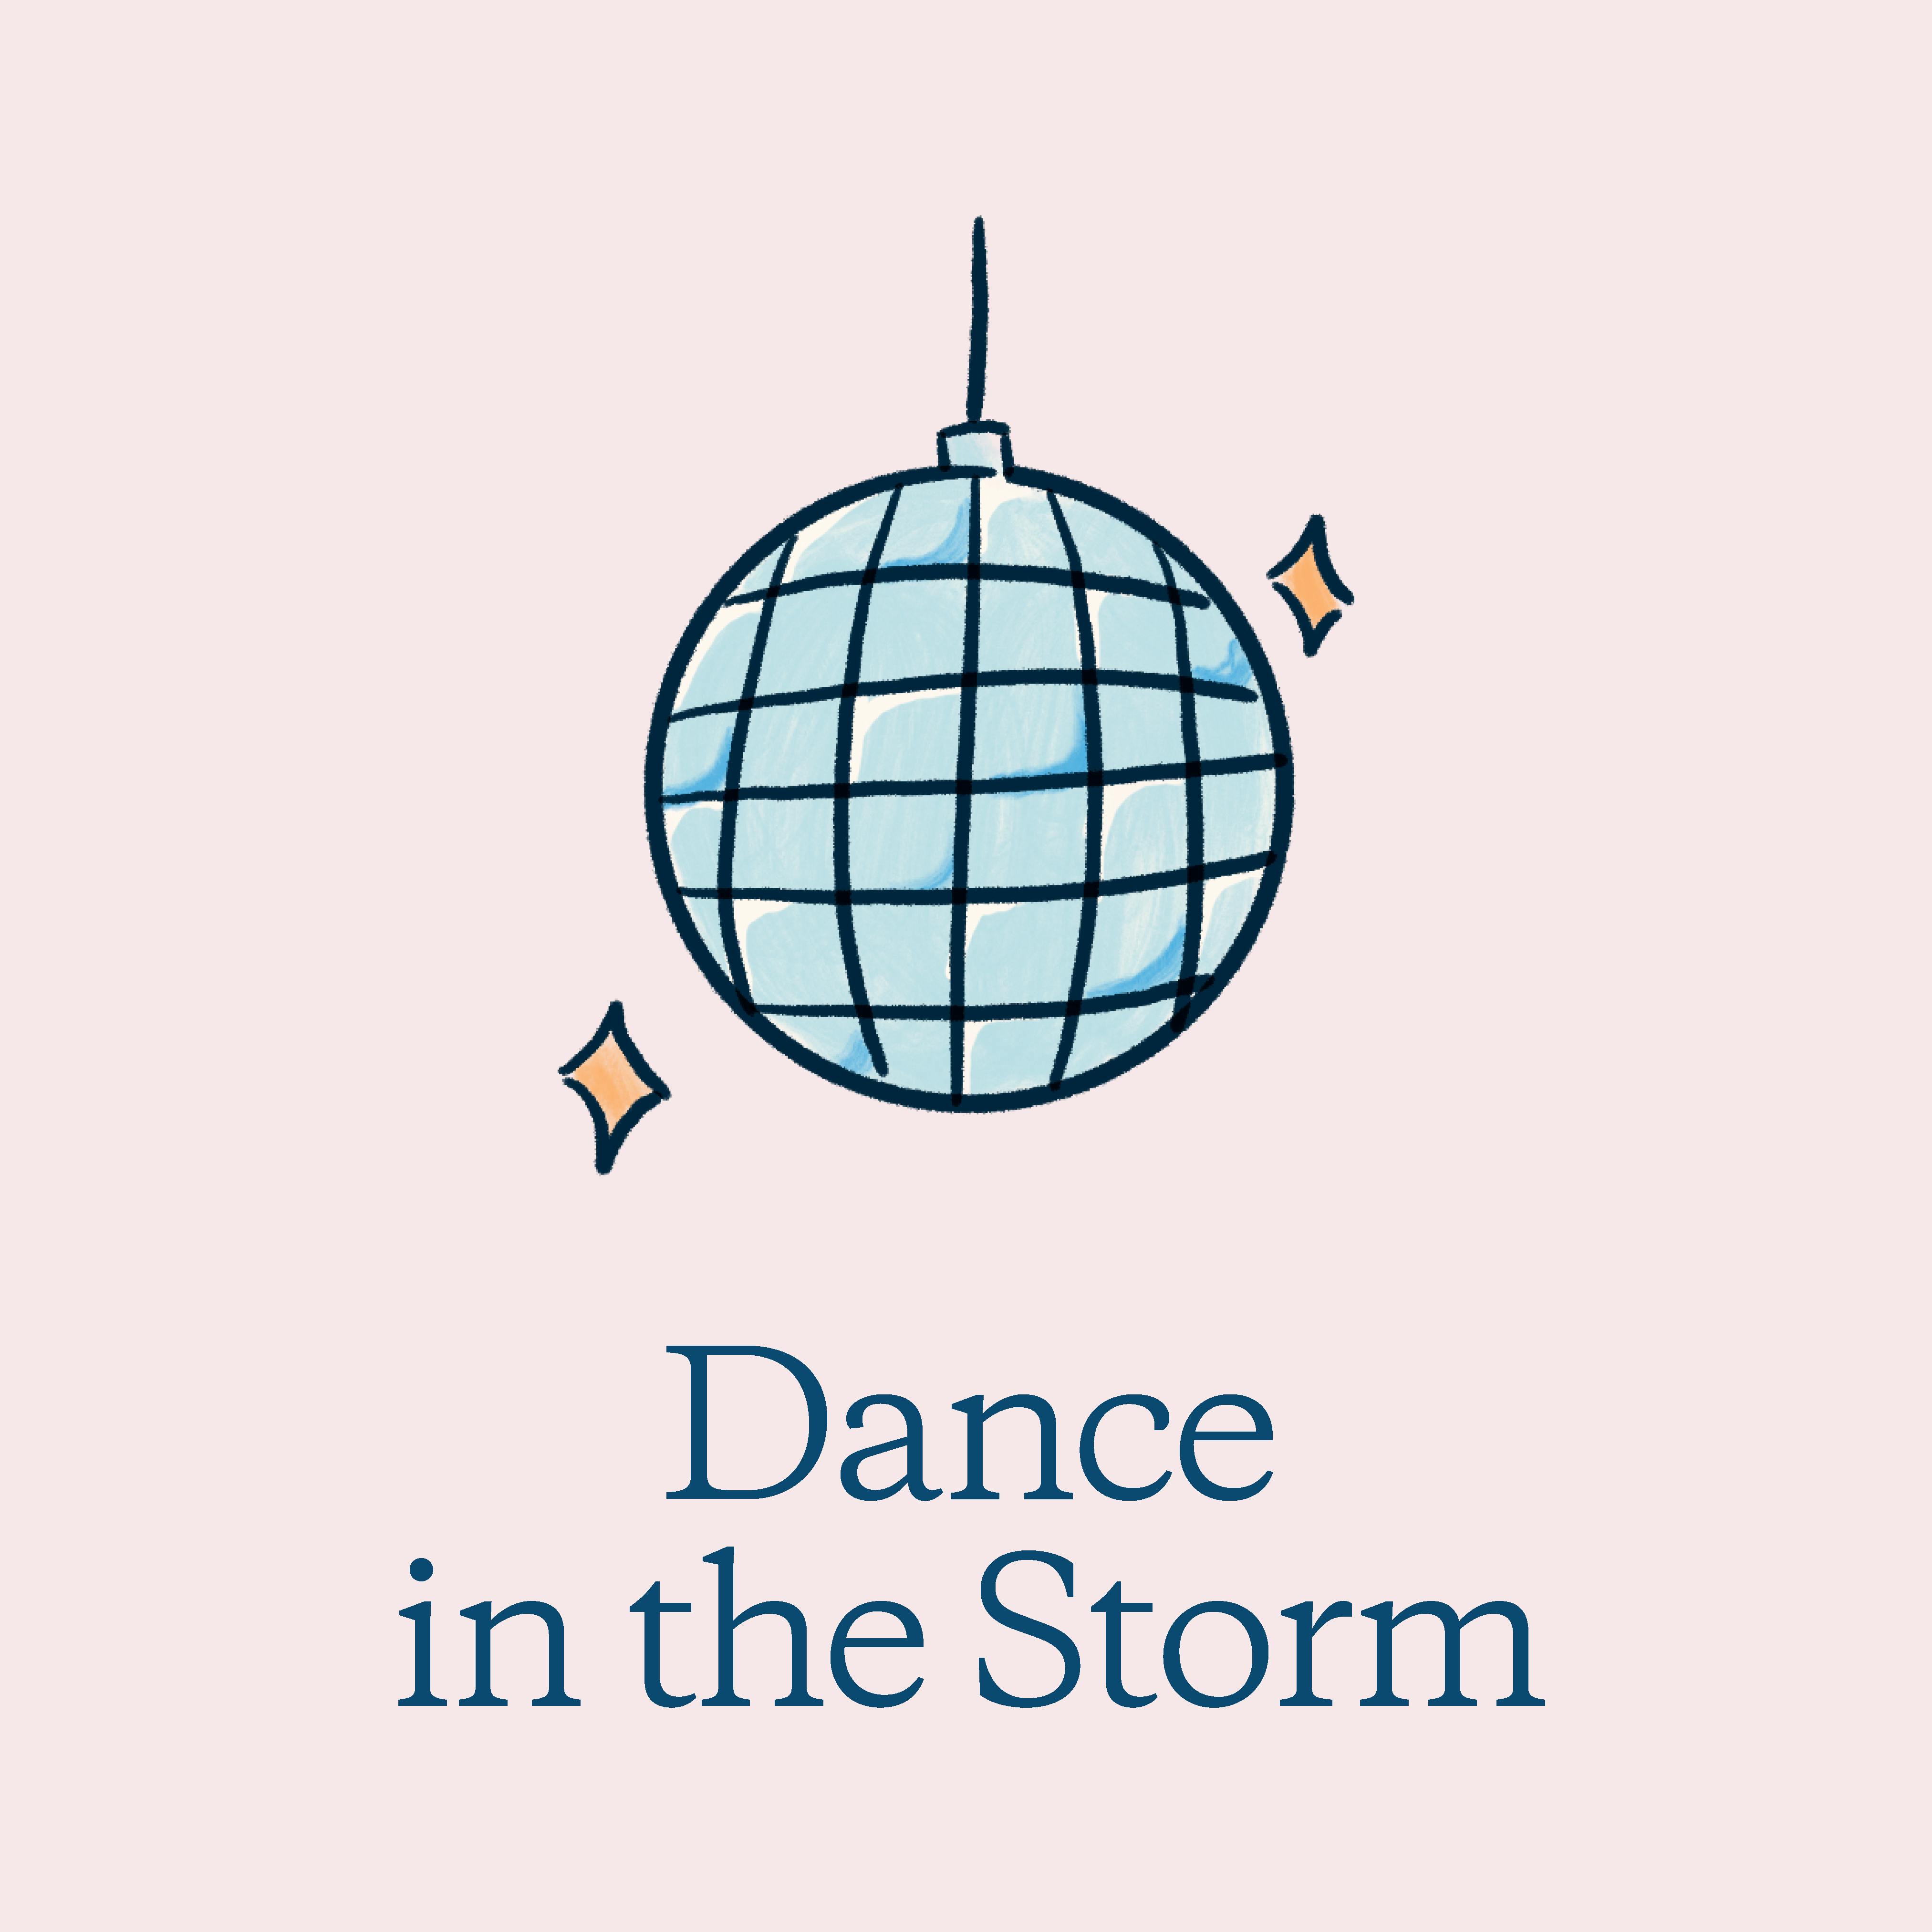 DANCE IN THE STORM